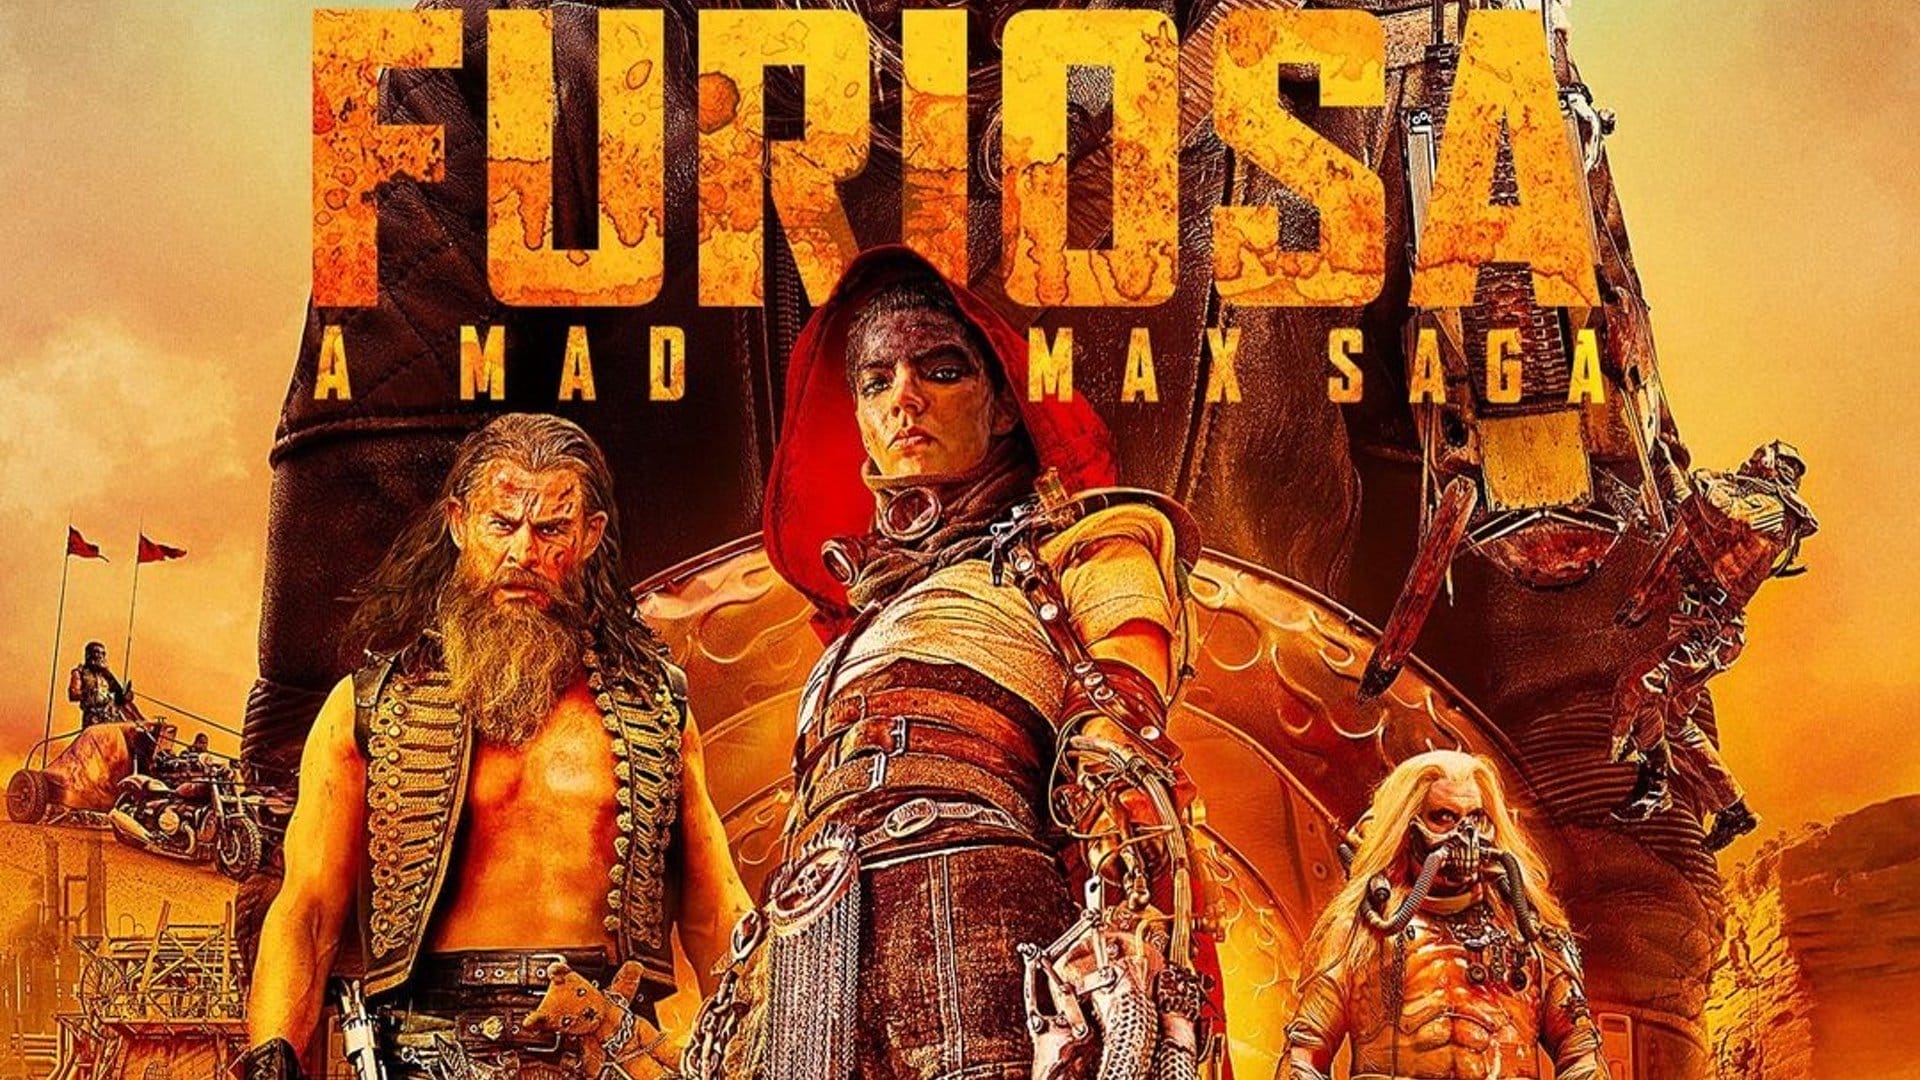 New poster revealed for Miller's 'Furiosa A Mad Max Saga'